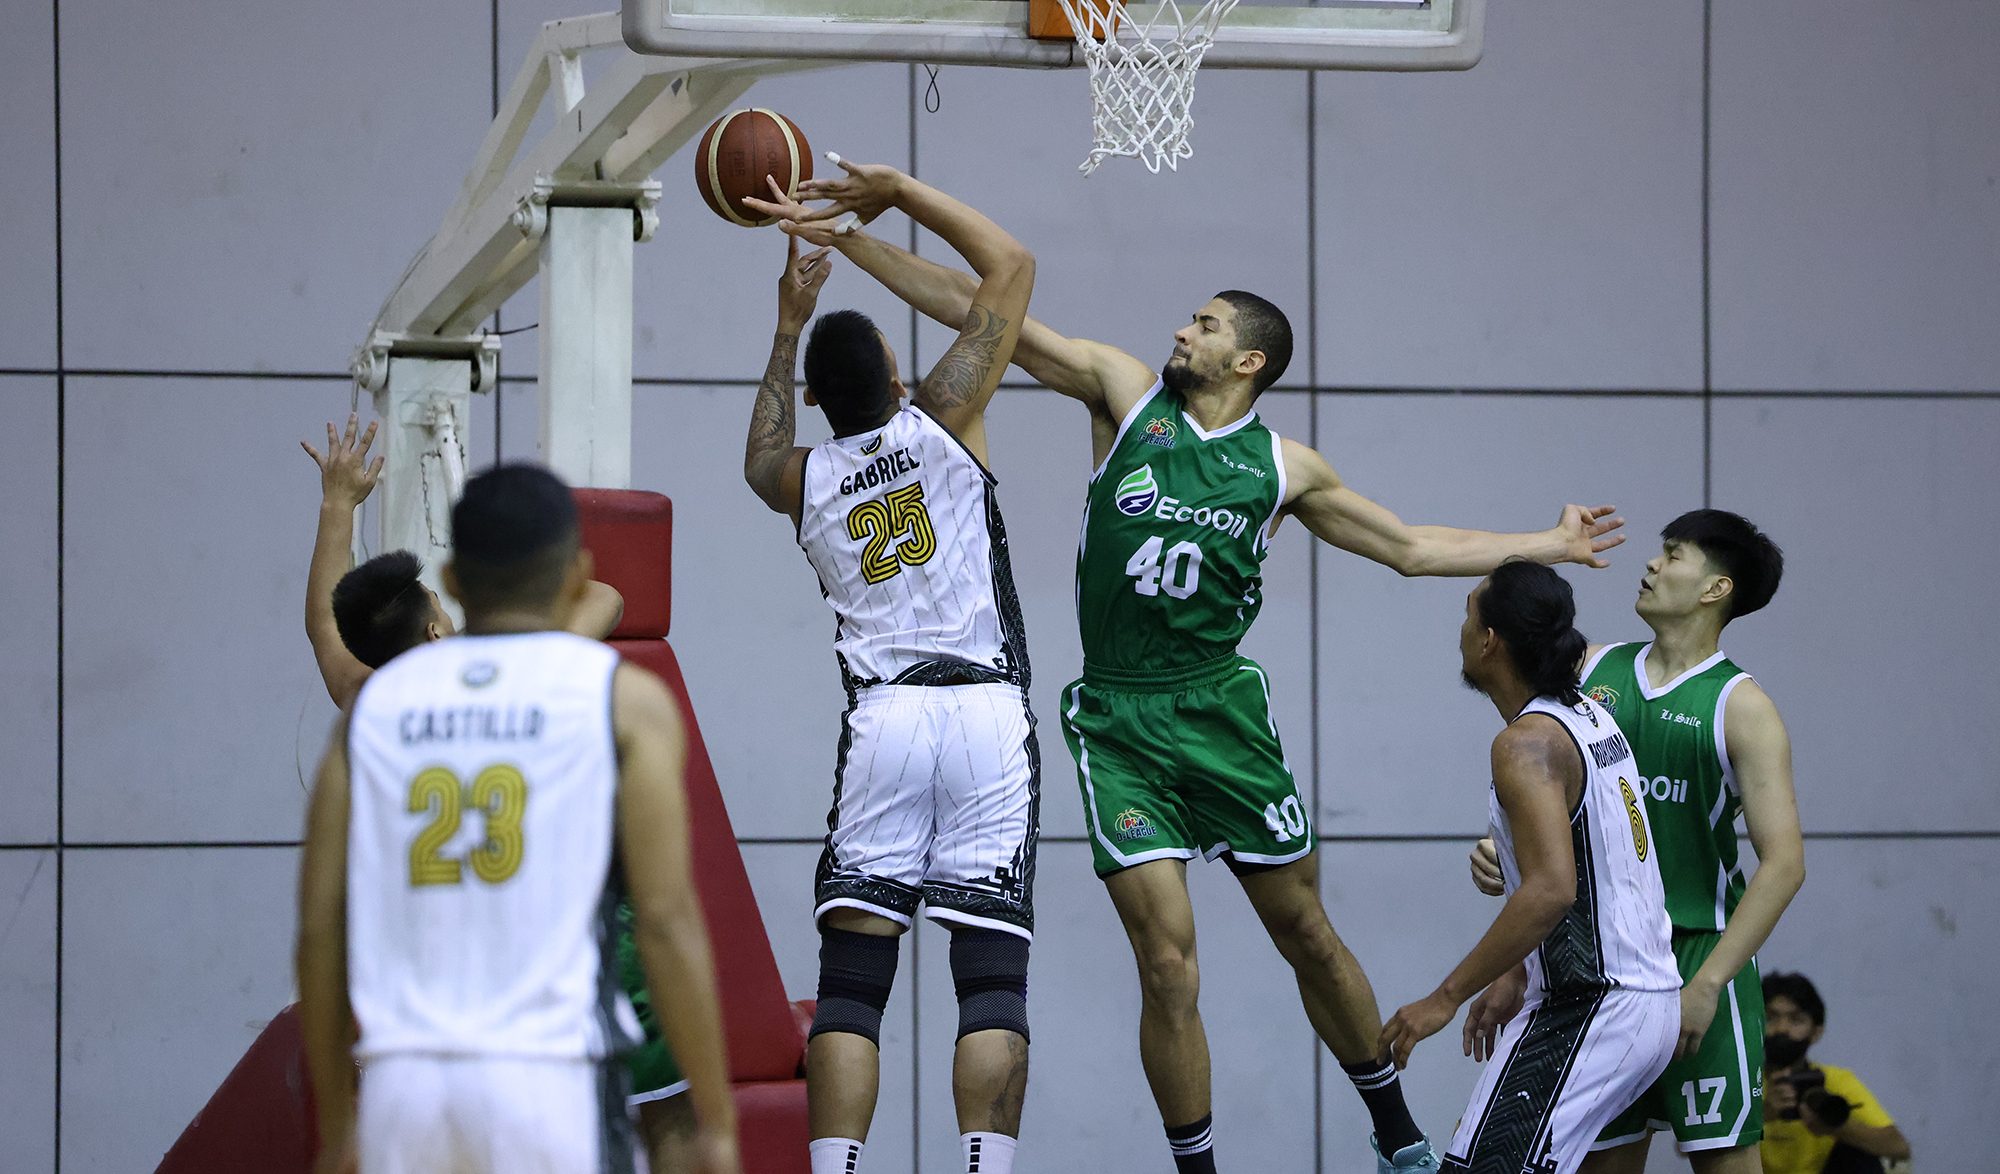 Undermanned La Salle, Perpetual cruise to huge D-League blowouts